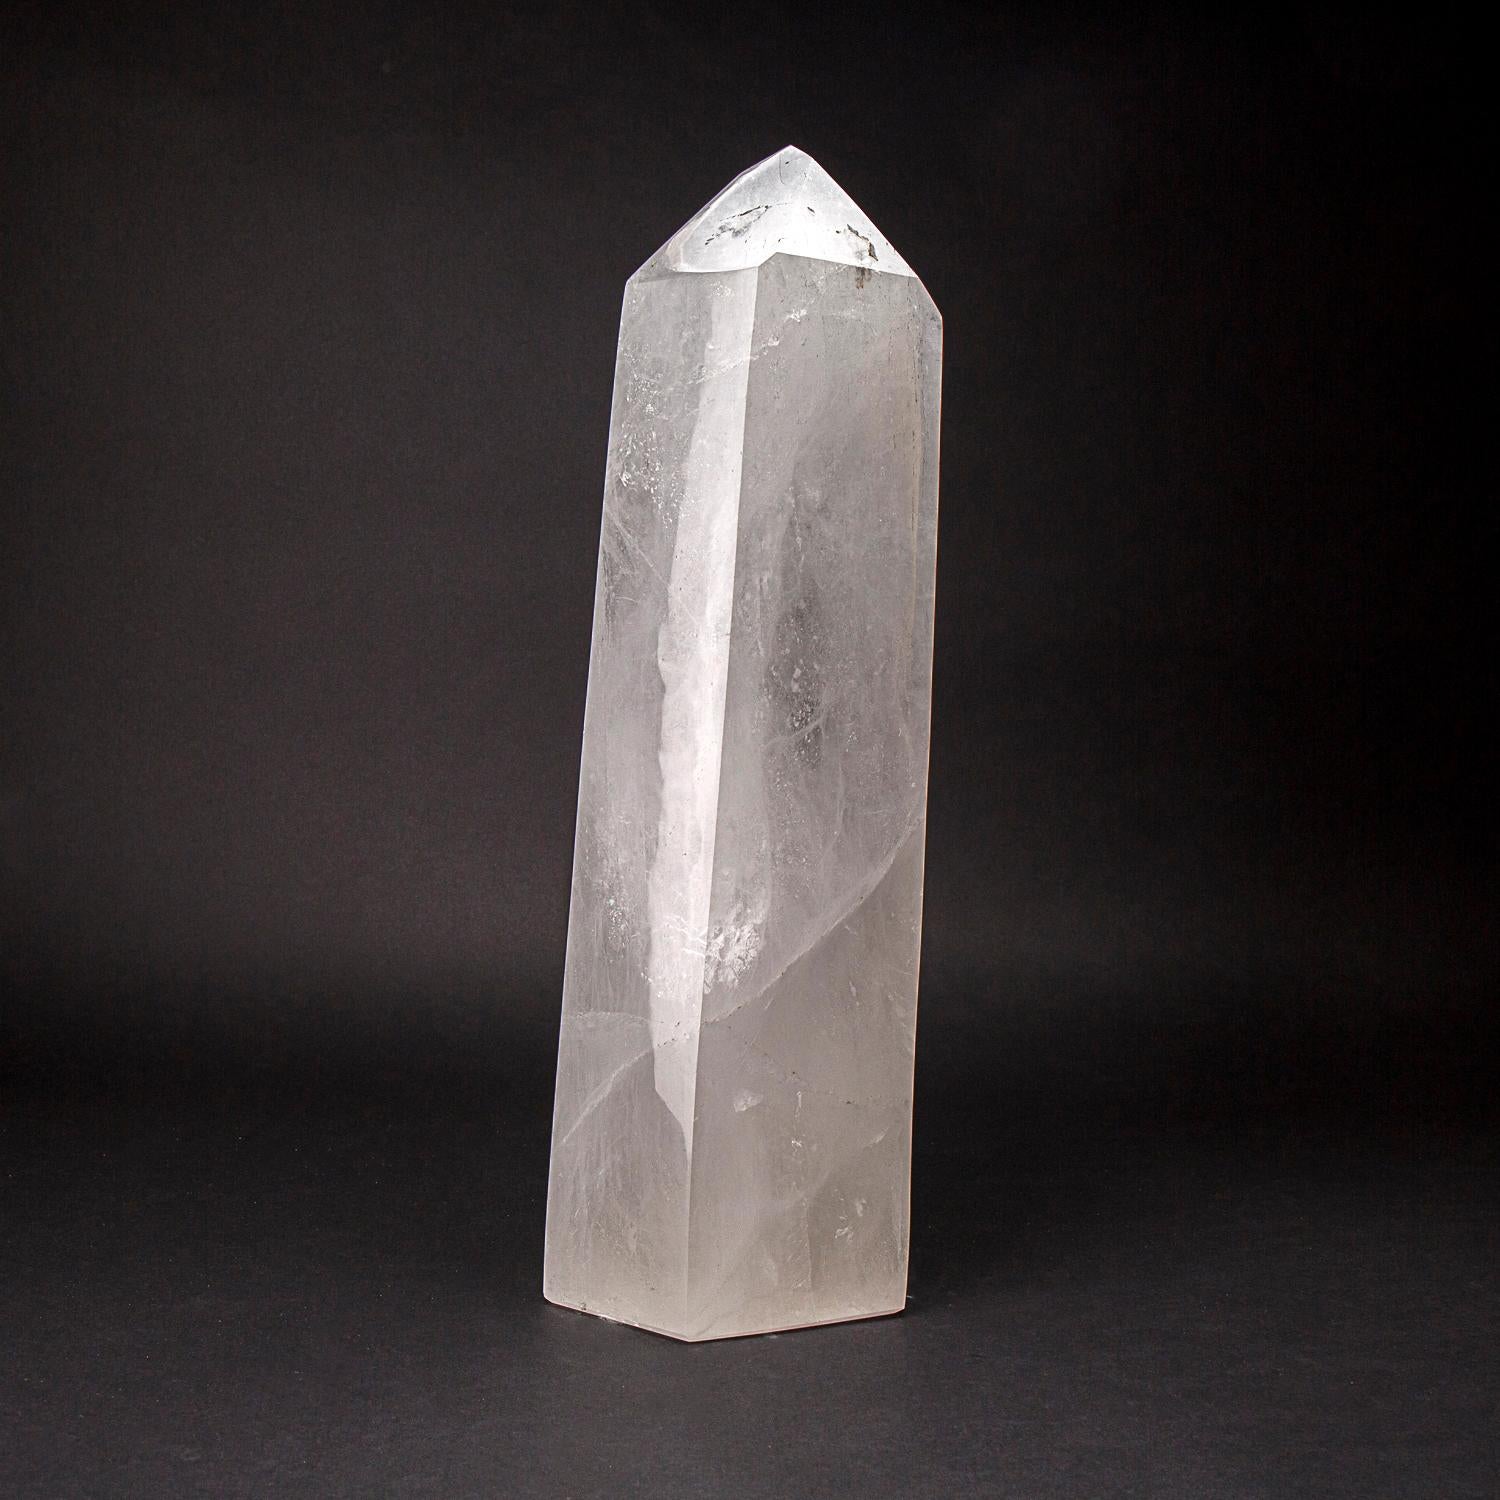 This Brazilian clear quartz crystal obelisk is of top museum quality, with a polished mirror finish on all sides. Known as the 